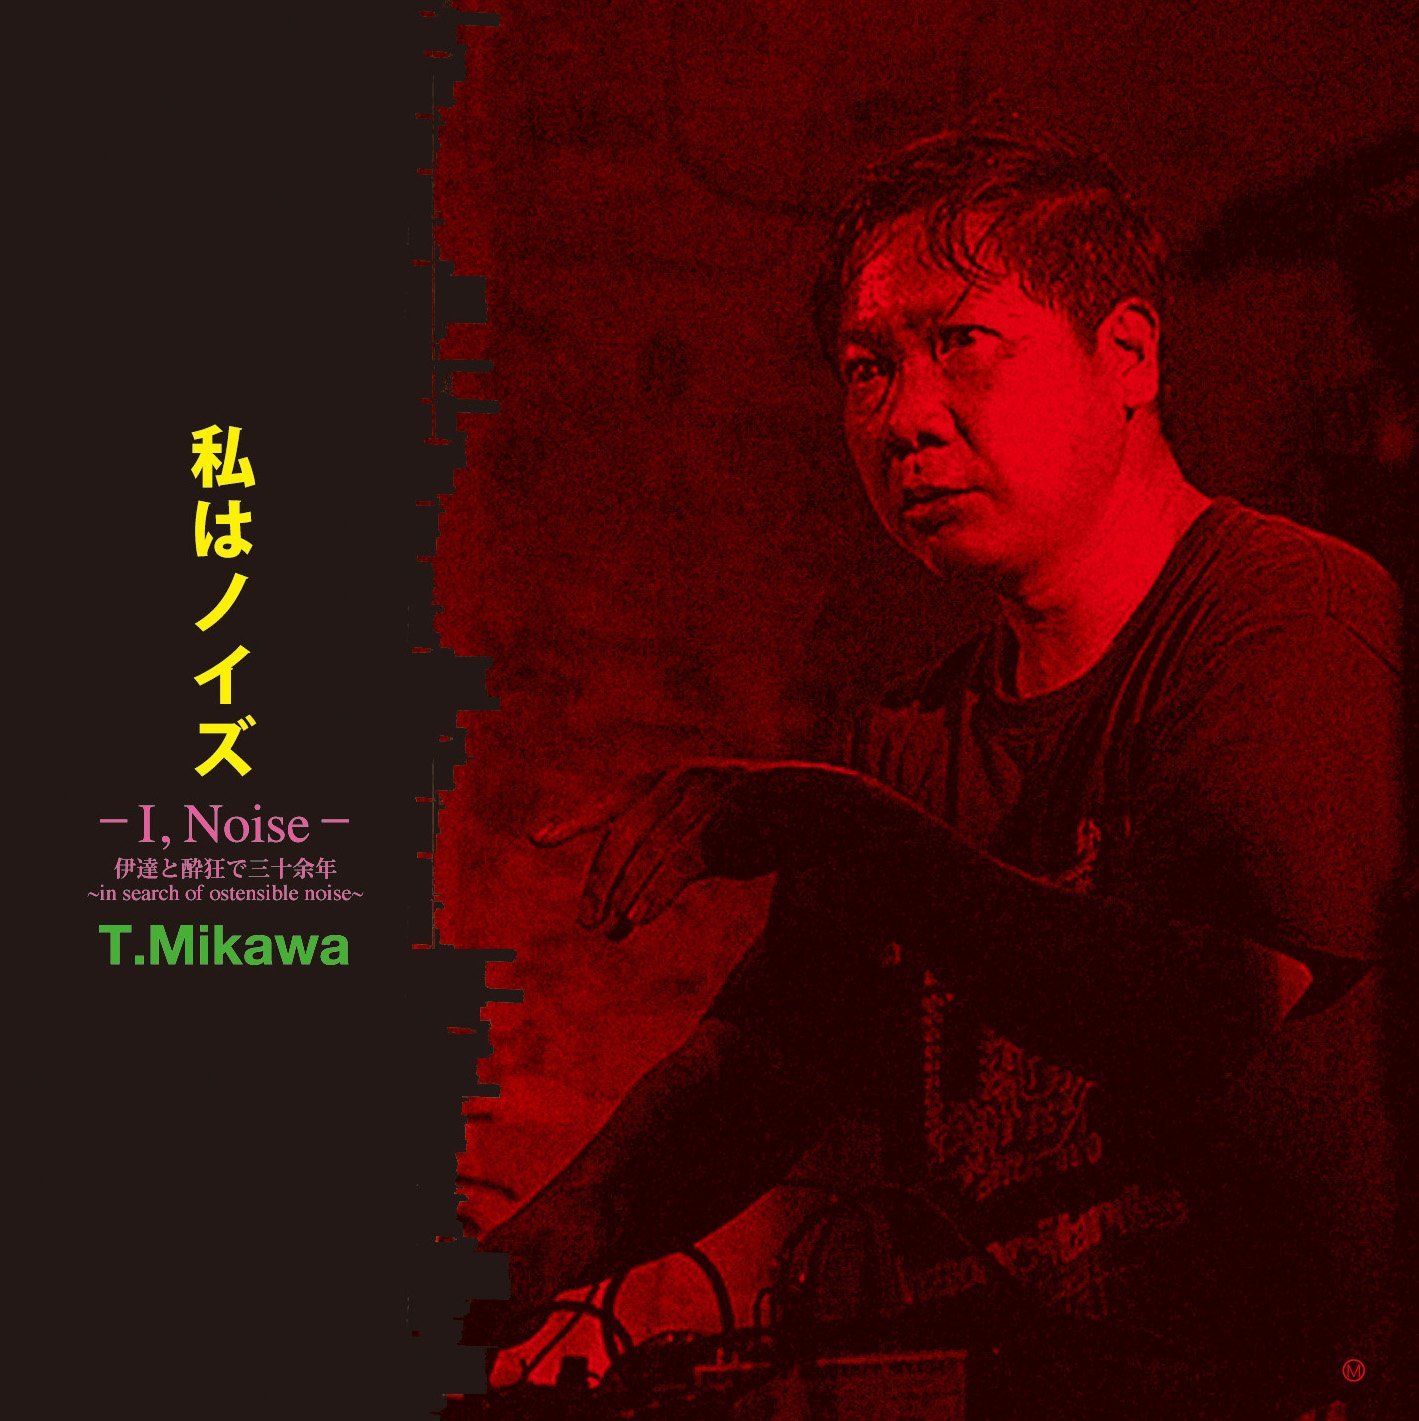 T.MIKAWA / T.美川 / 私はノイズ(I,Noise)伊達と酔狂で三十余年 -in search of ostensible noise-